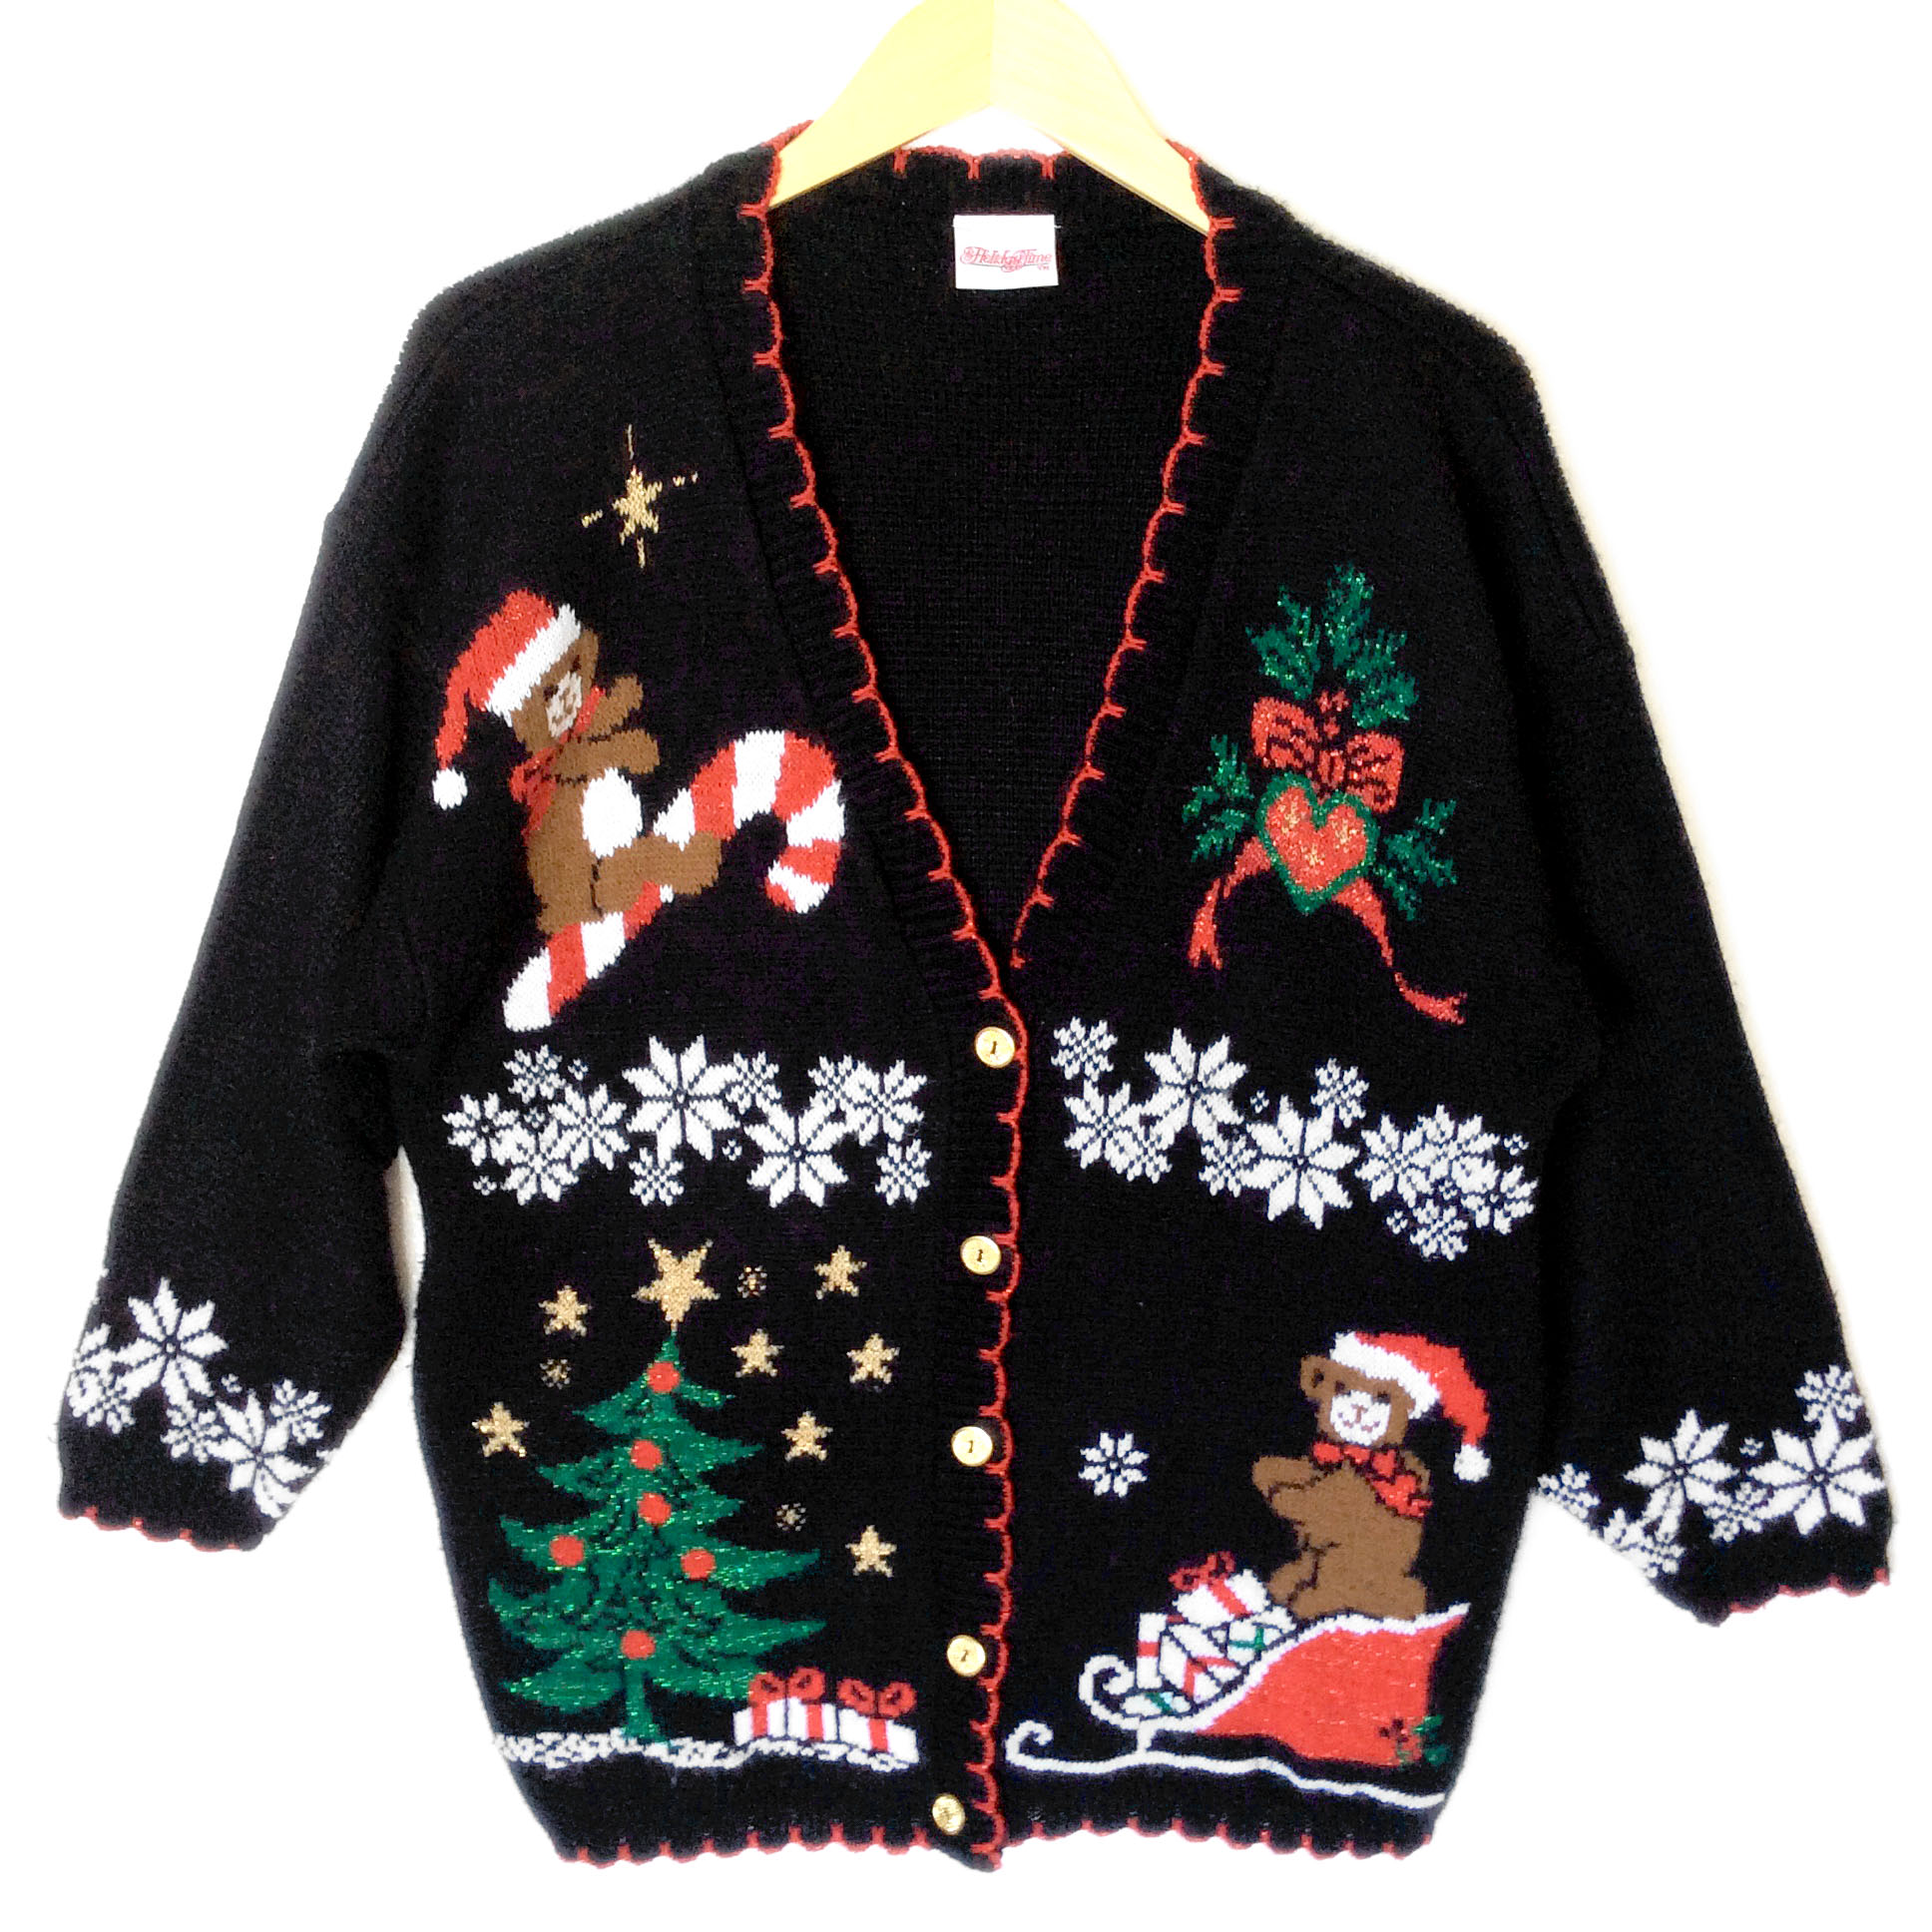 Vintage 80s Teddy Bears Tacky Sparkle Ugly Christmas Sweater - The Ugly ...